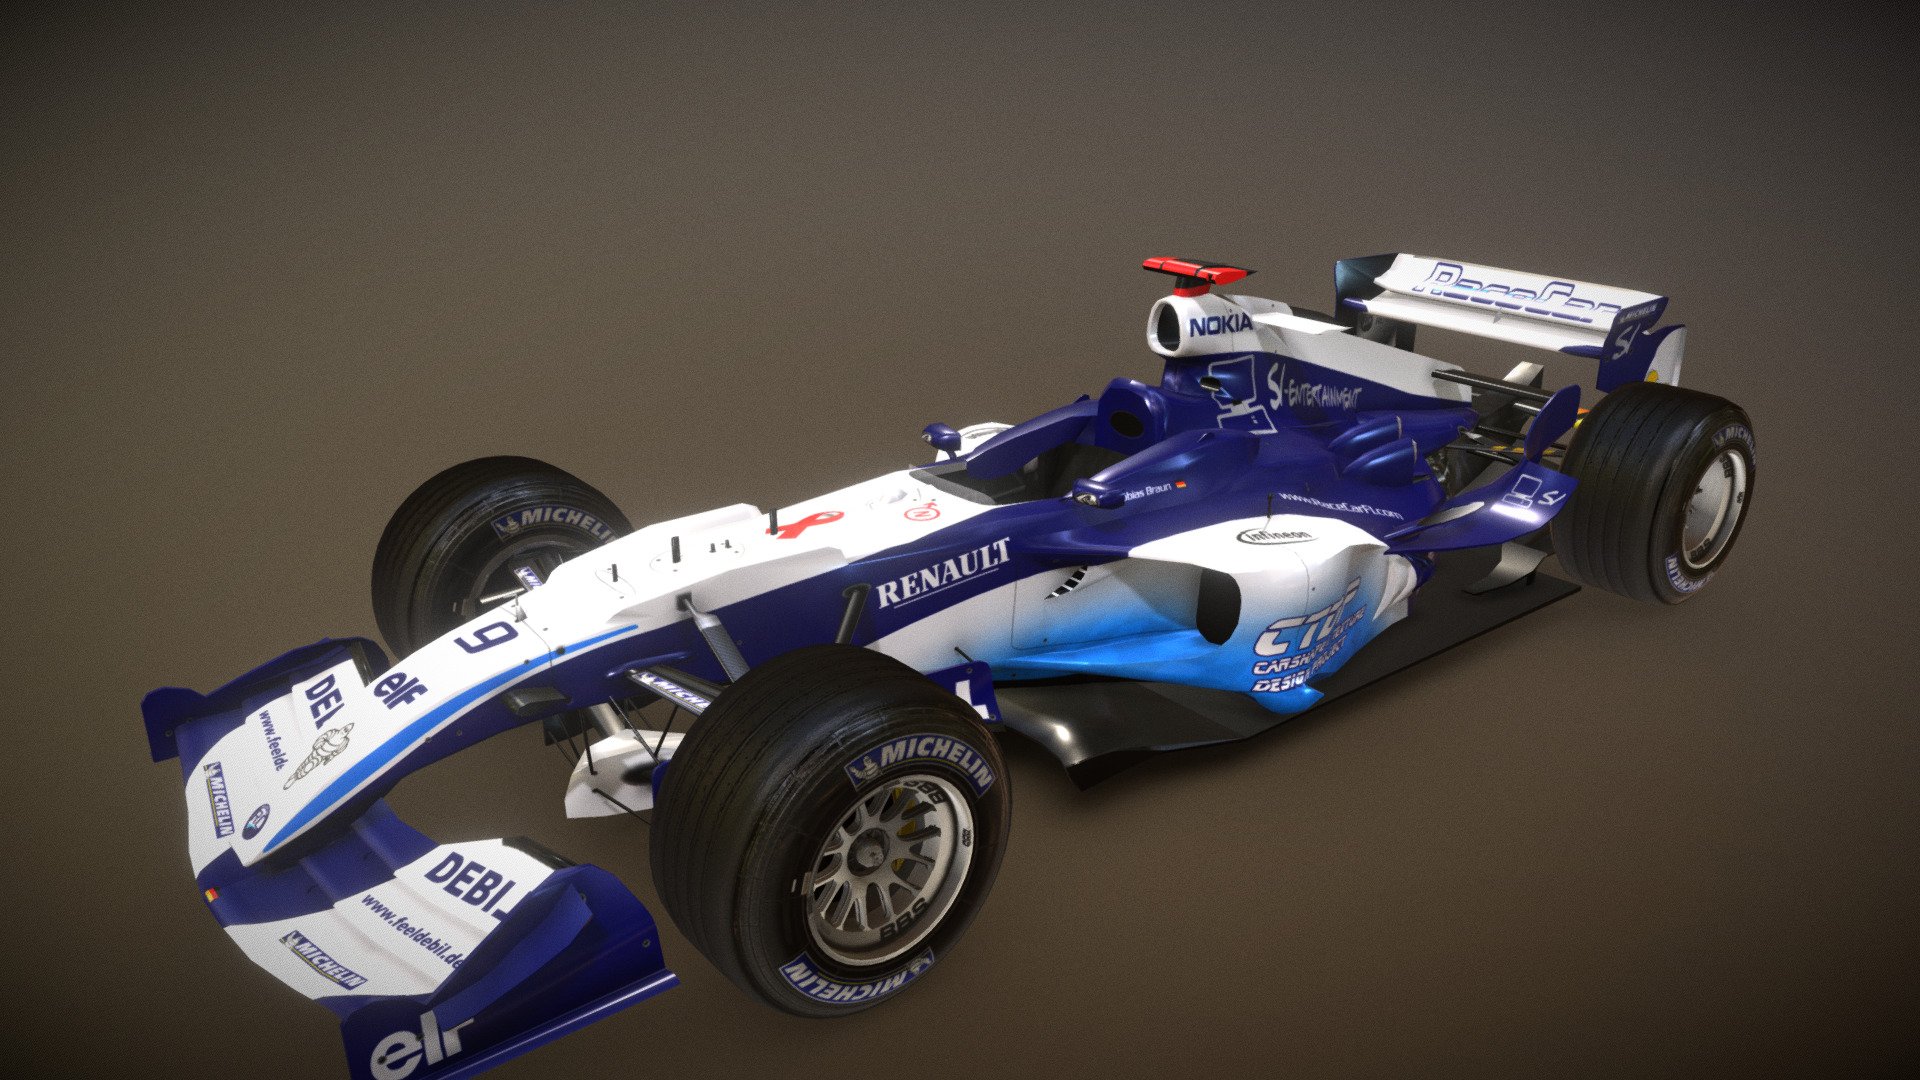 The car was created in 2004 for the virtual RaceCar F1 team. It ran in 2005 in the GP4IL
It's a Formula car matching regulations of F1 2005.

http://www.racecarf1.com

Tires with friendly permission from CTDP F1 2005 mod 3d model